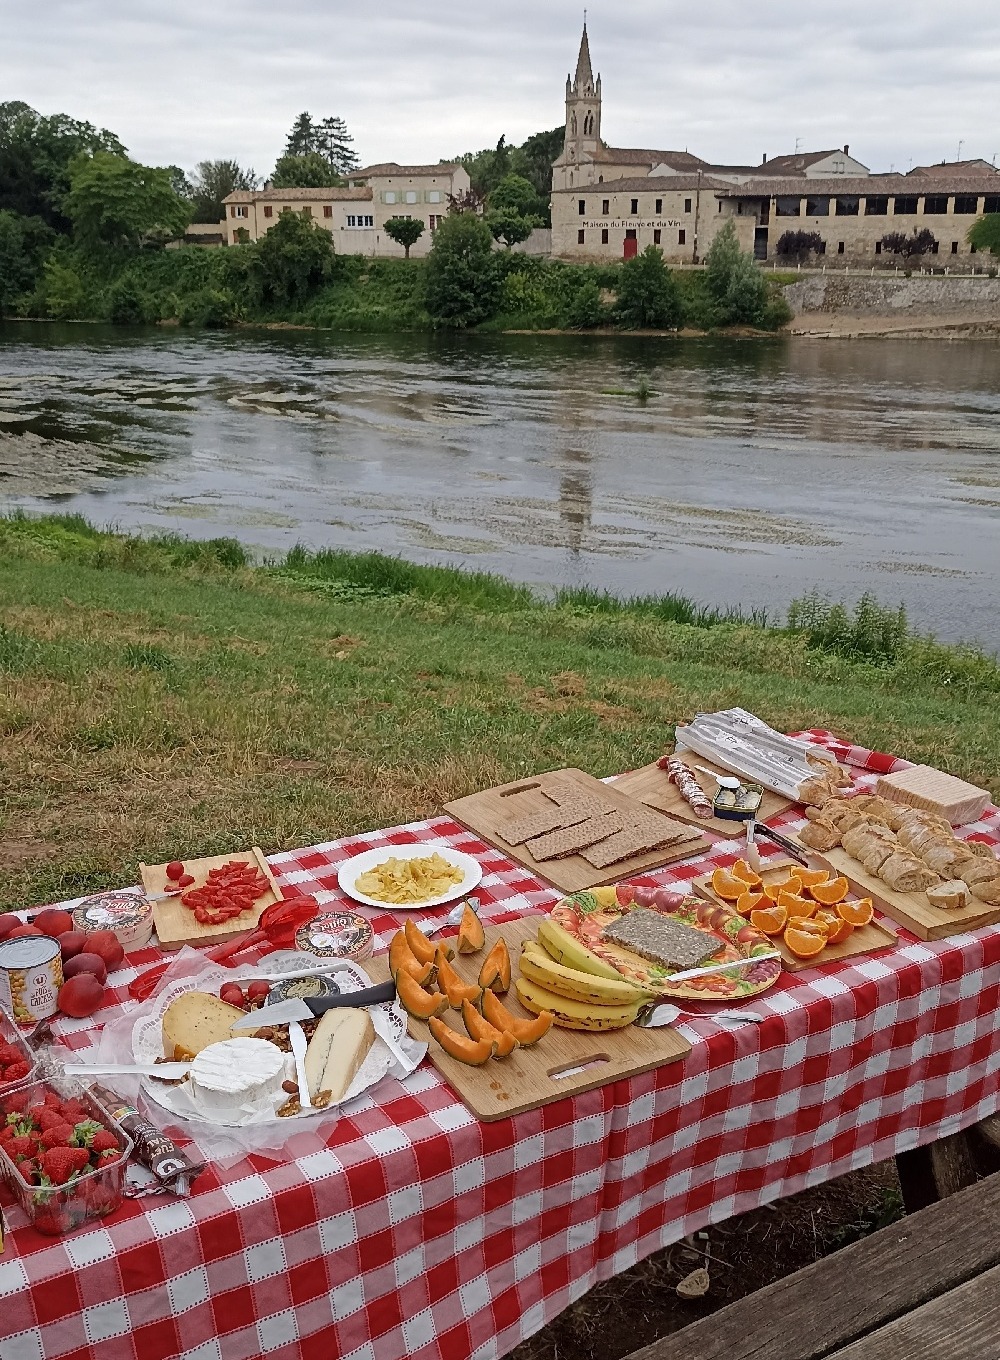 Picnic table with food next to river